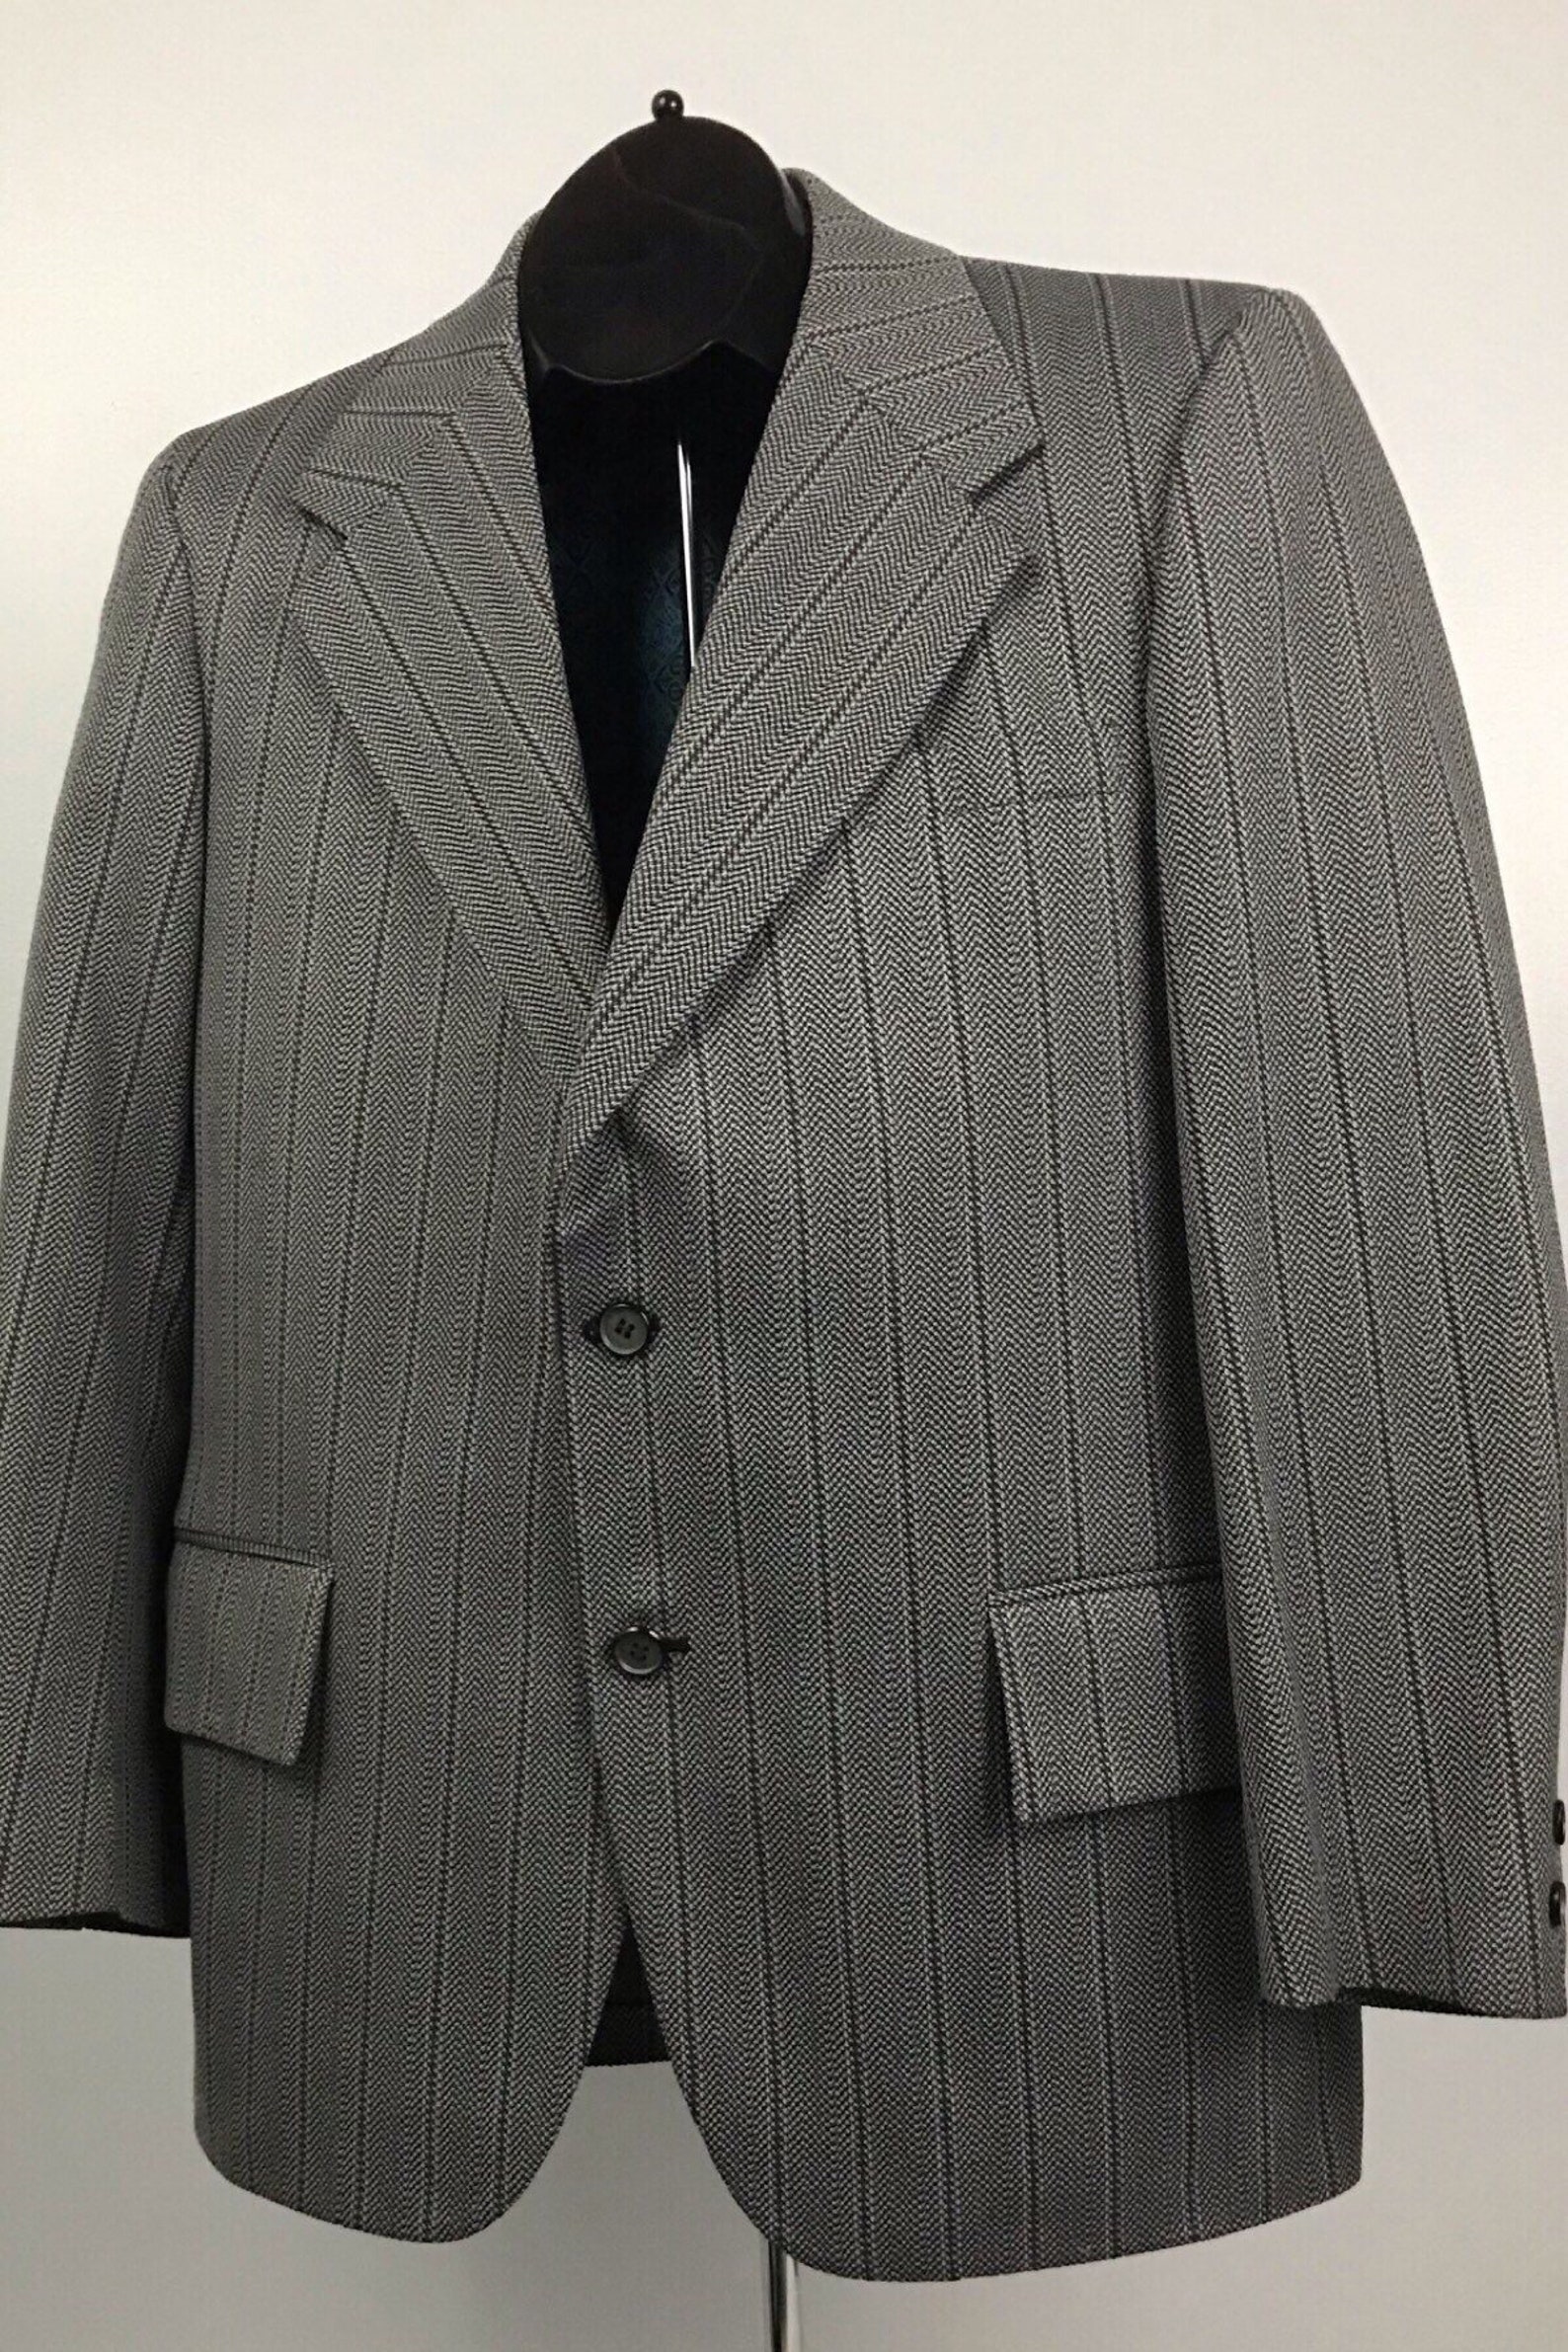 1970s Pinstripe Suit / 70s Gray & Red Stripe 2 Button Suit - Etsy